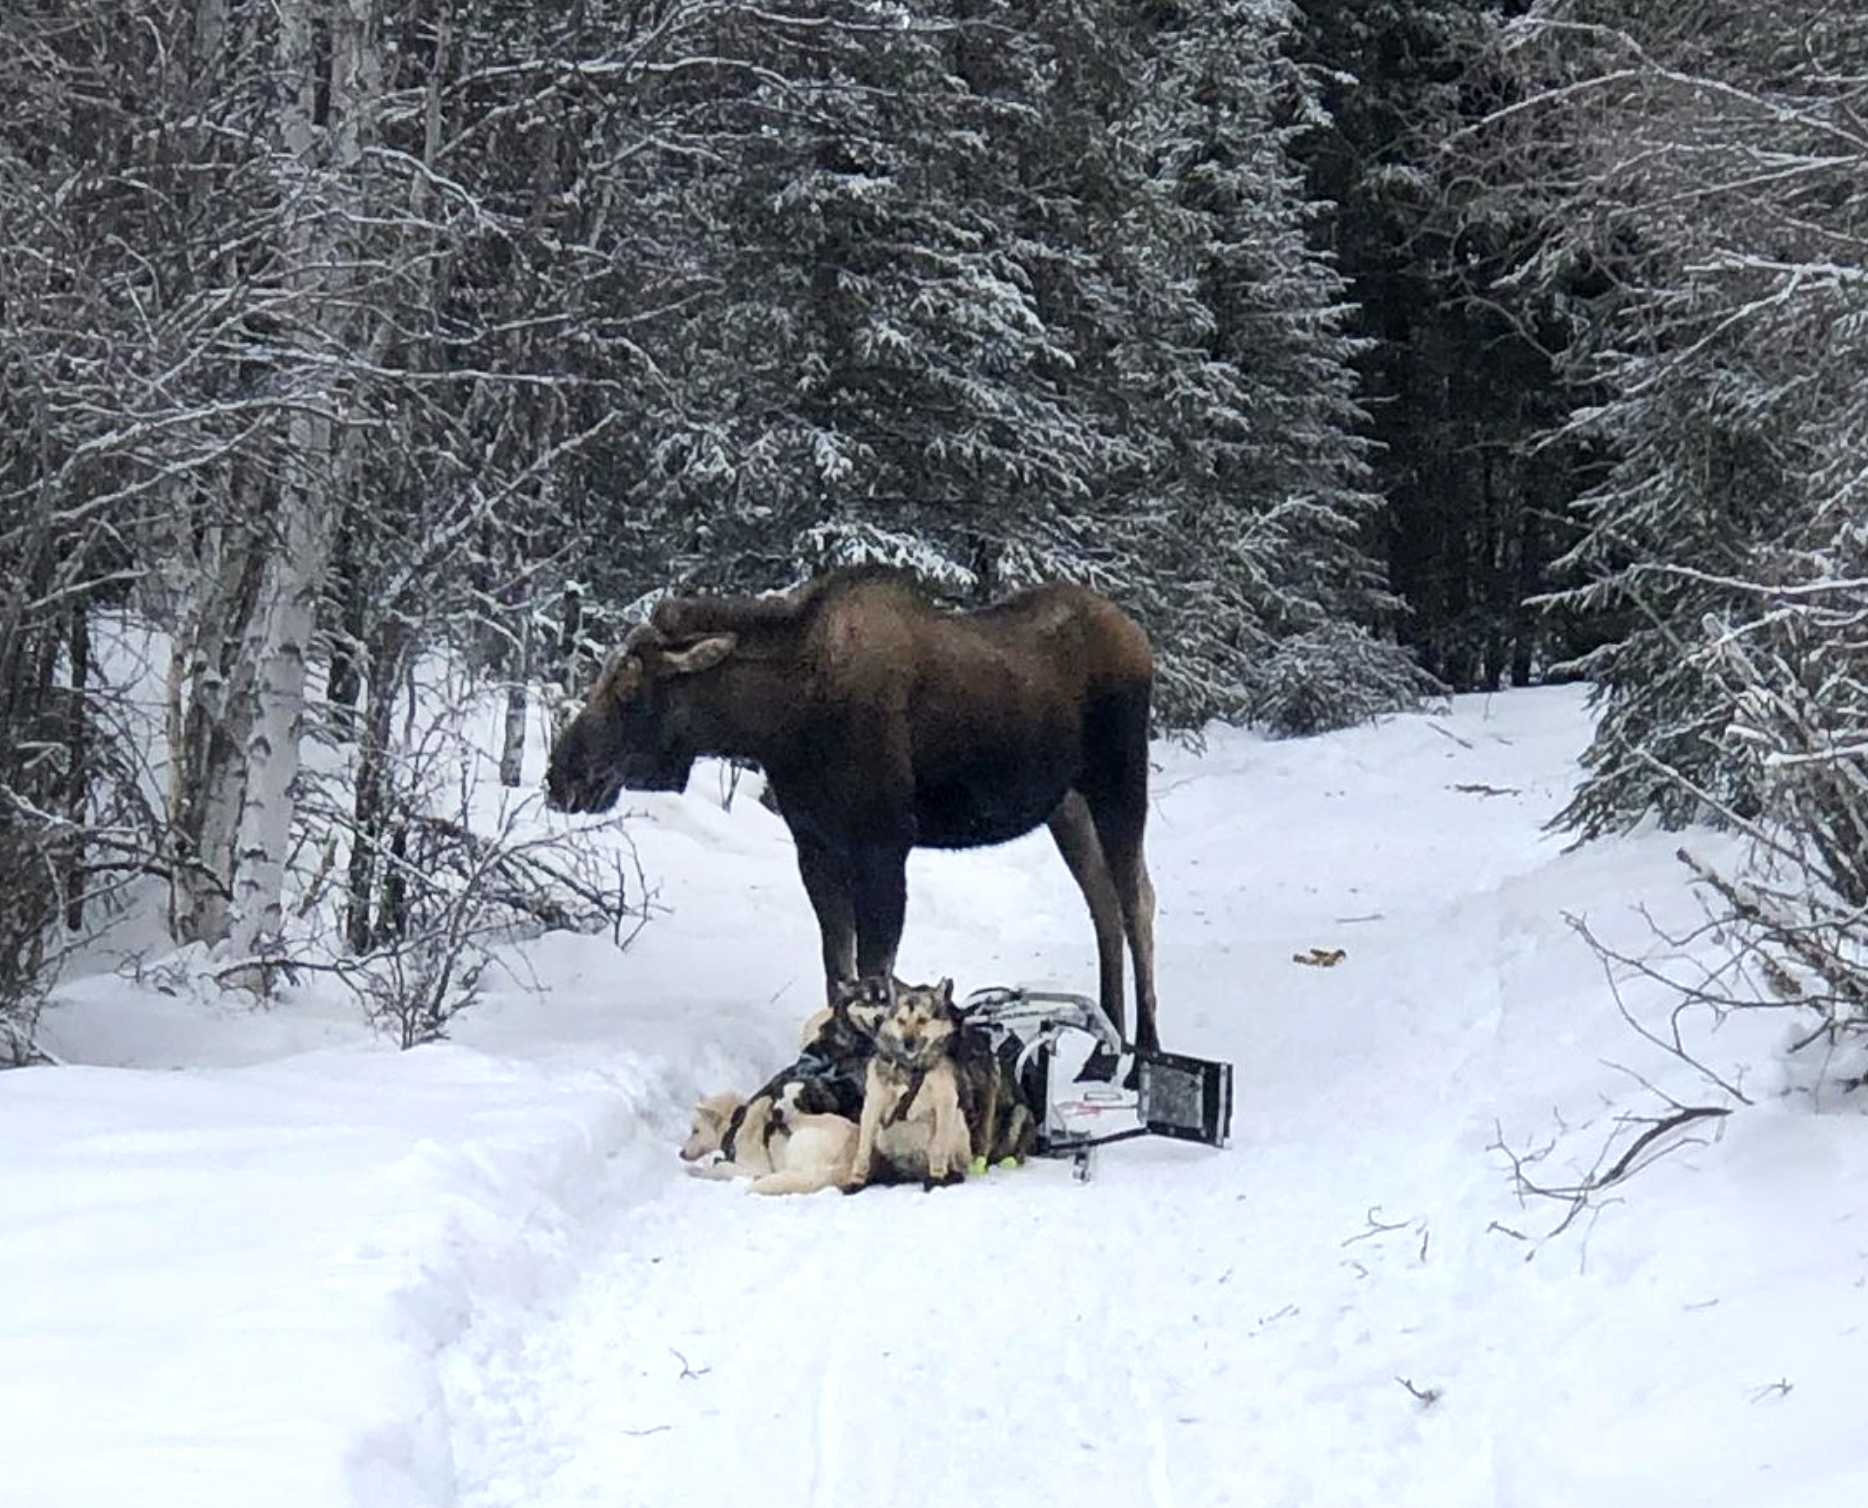 A moose attacked a sled dog team.